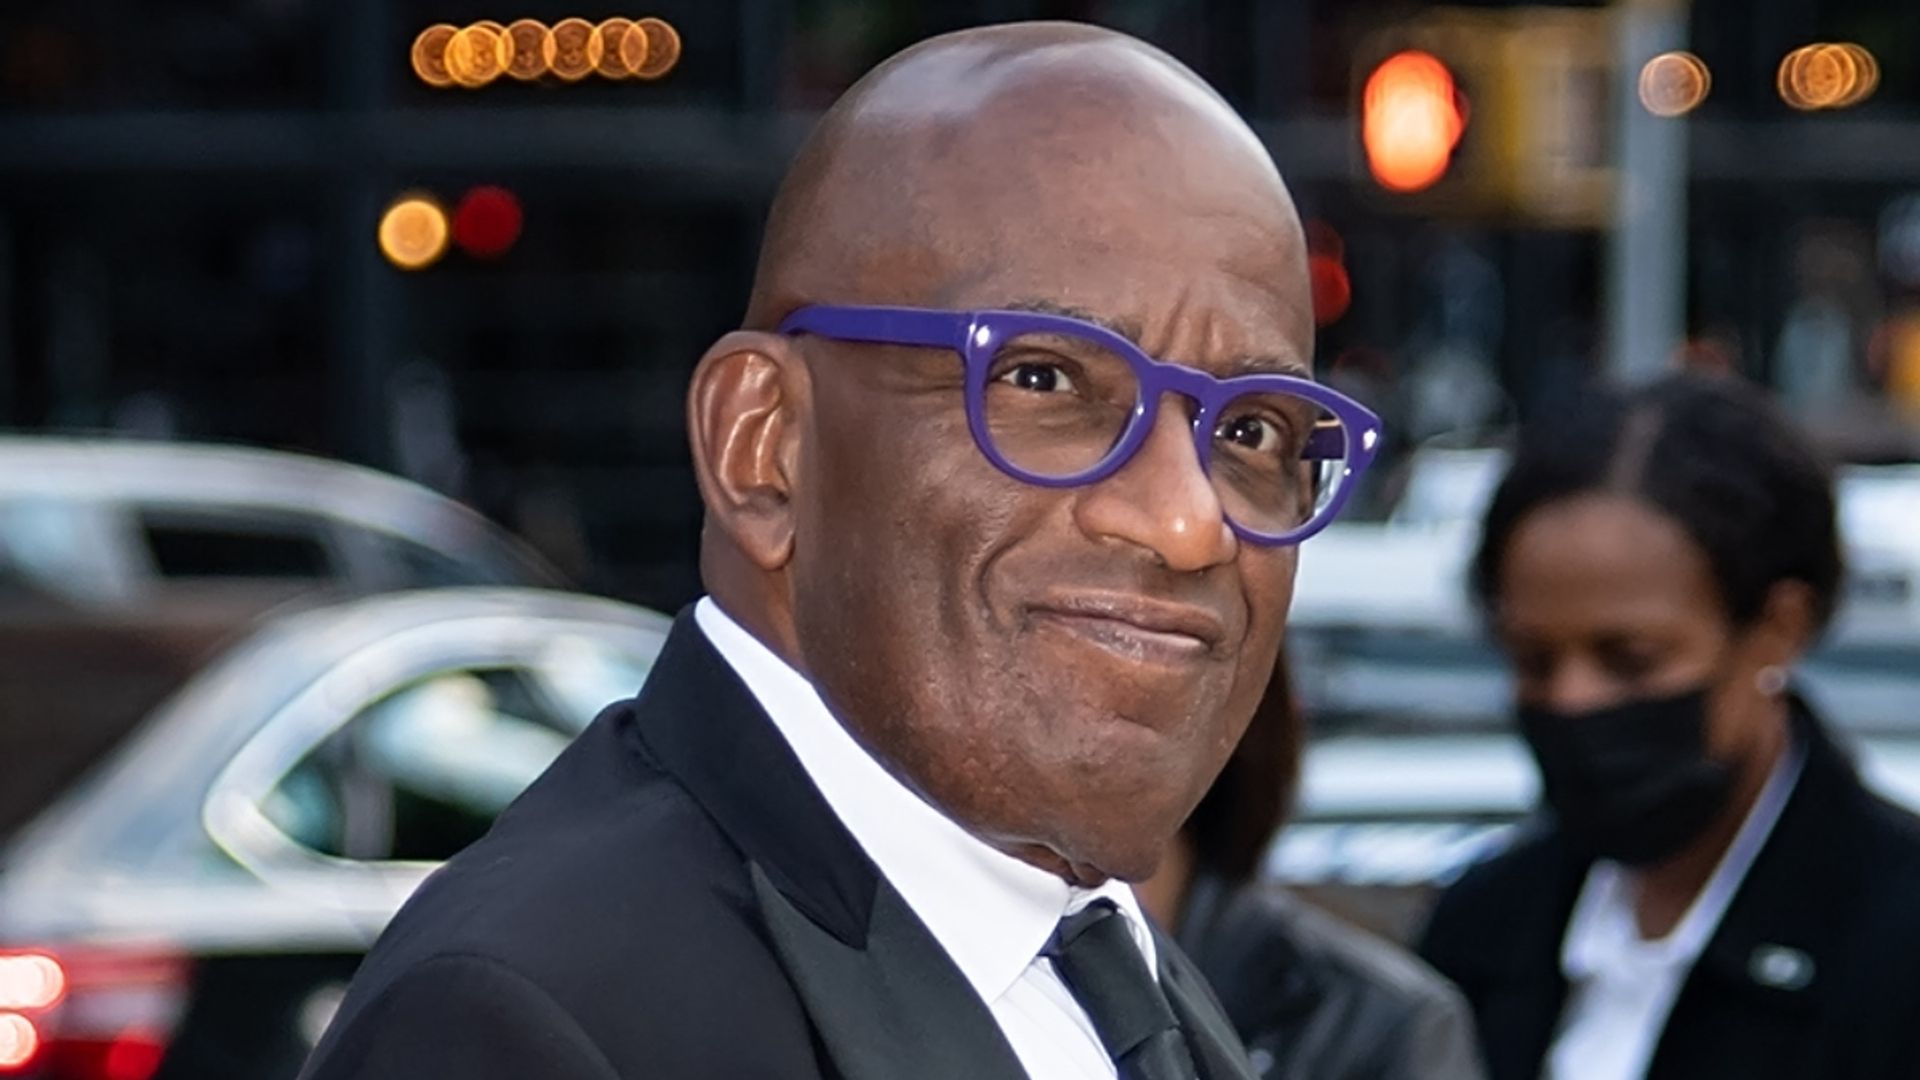 Al Roker returns to big welcome from Today co-stars for an emotional show